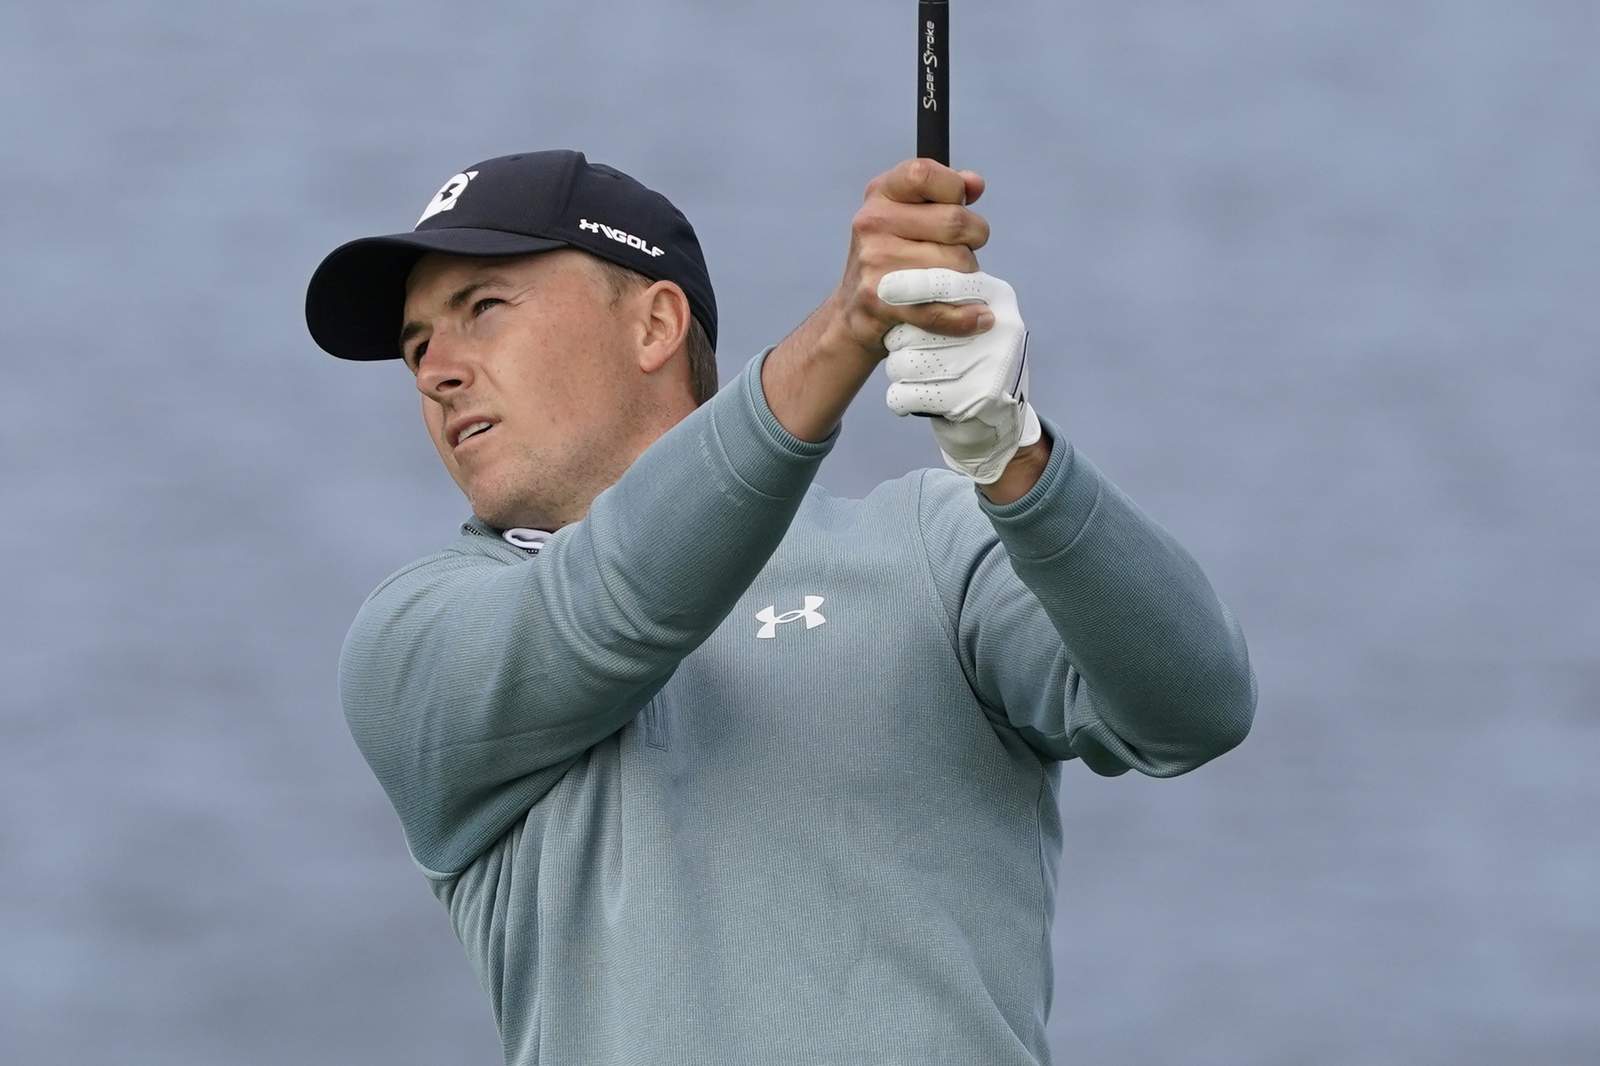 Late eagle from the fairway stakes Spieth to lead at Pebble